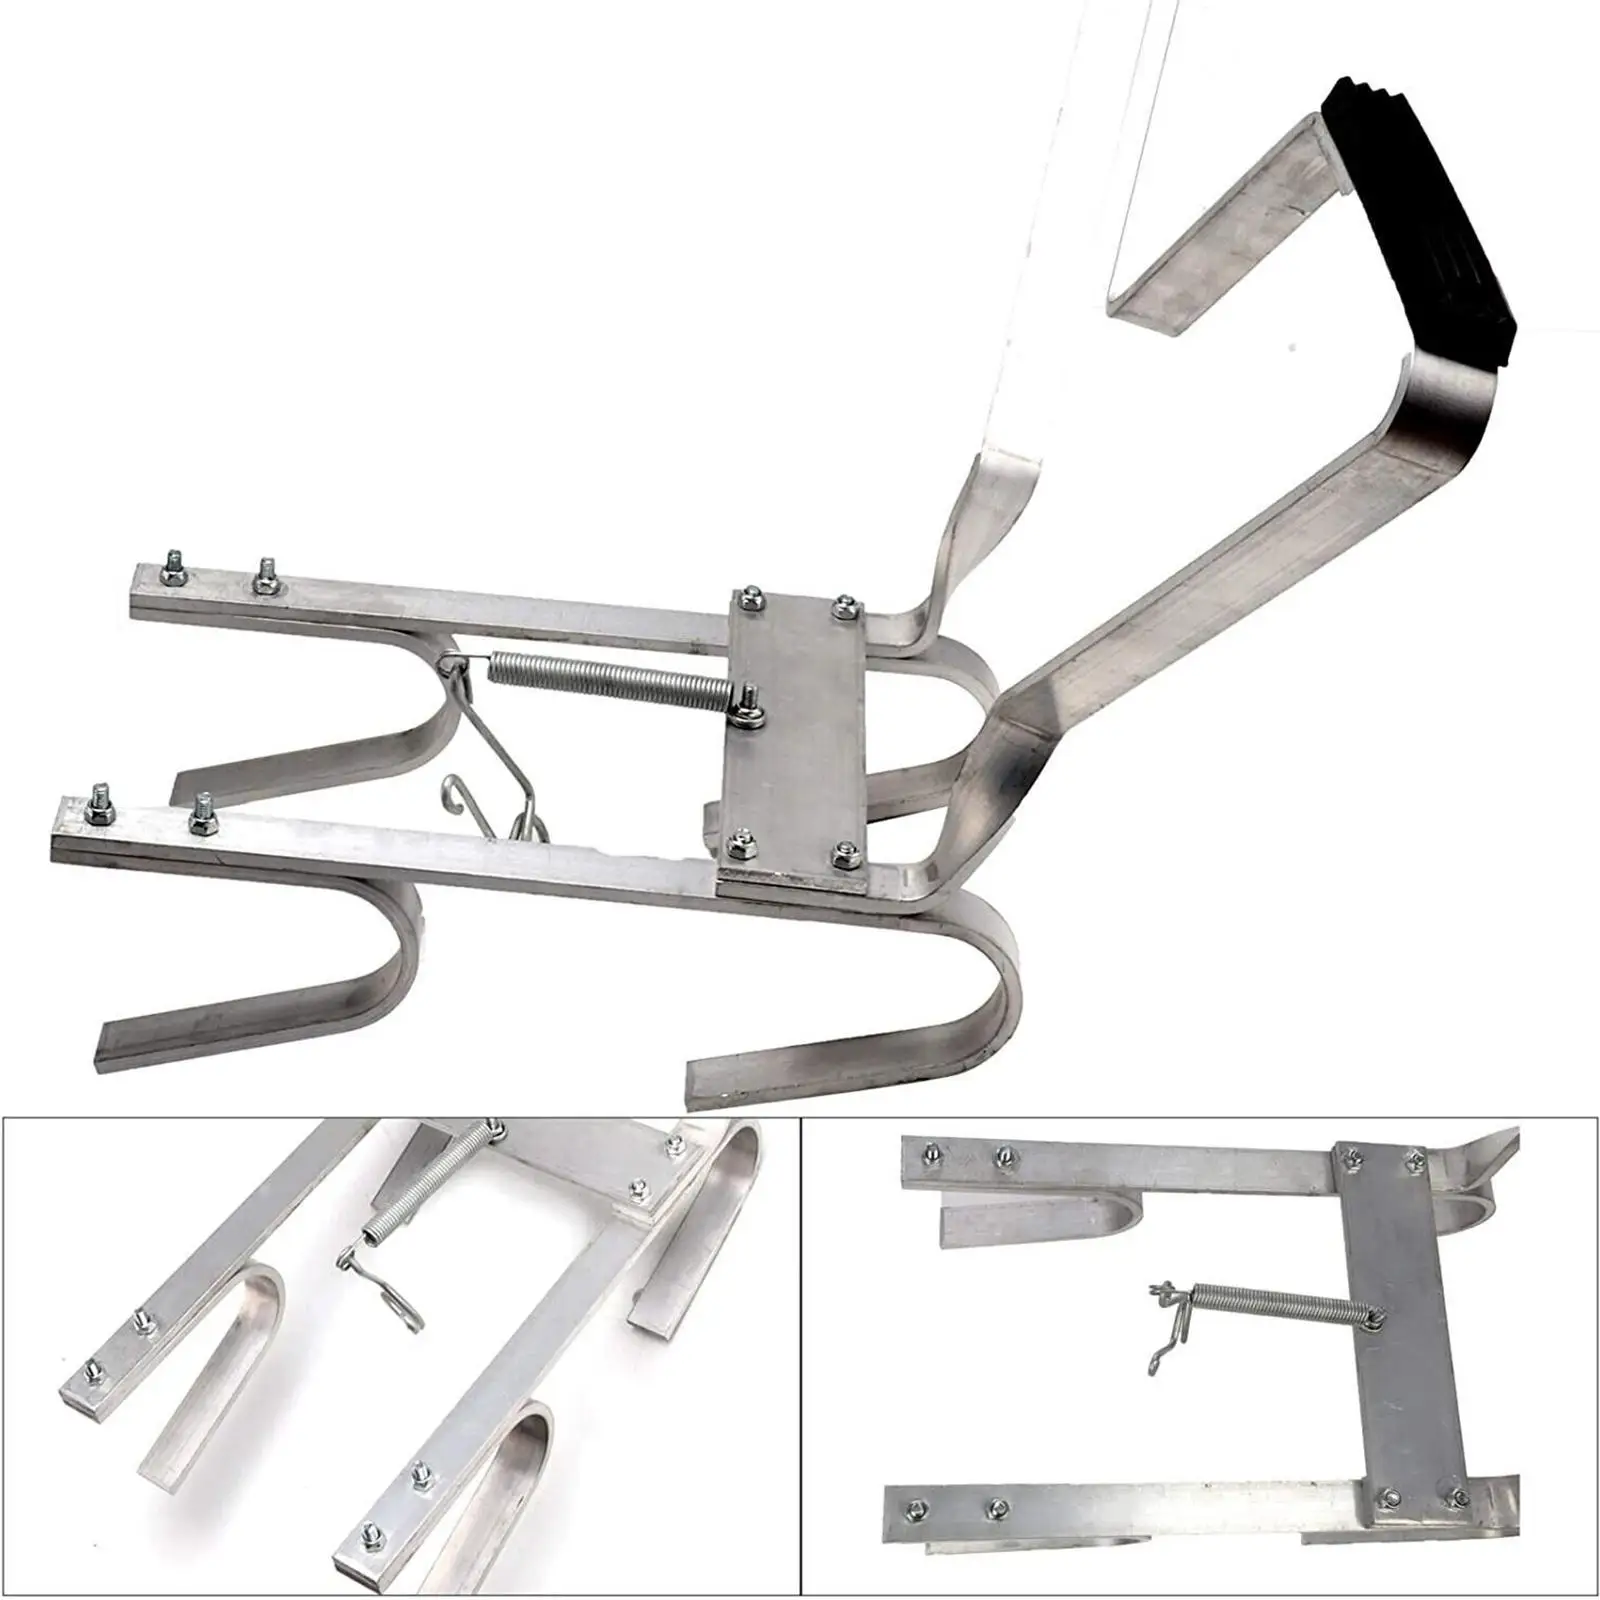 Ladder Stabilizer Ladder Extension Accessory Wall Ladder Standoff for Window Cleaning Drainpipes Trees Telegraph Poles Painters